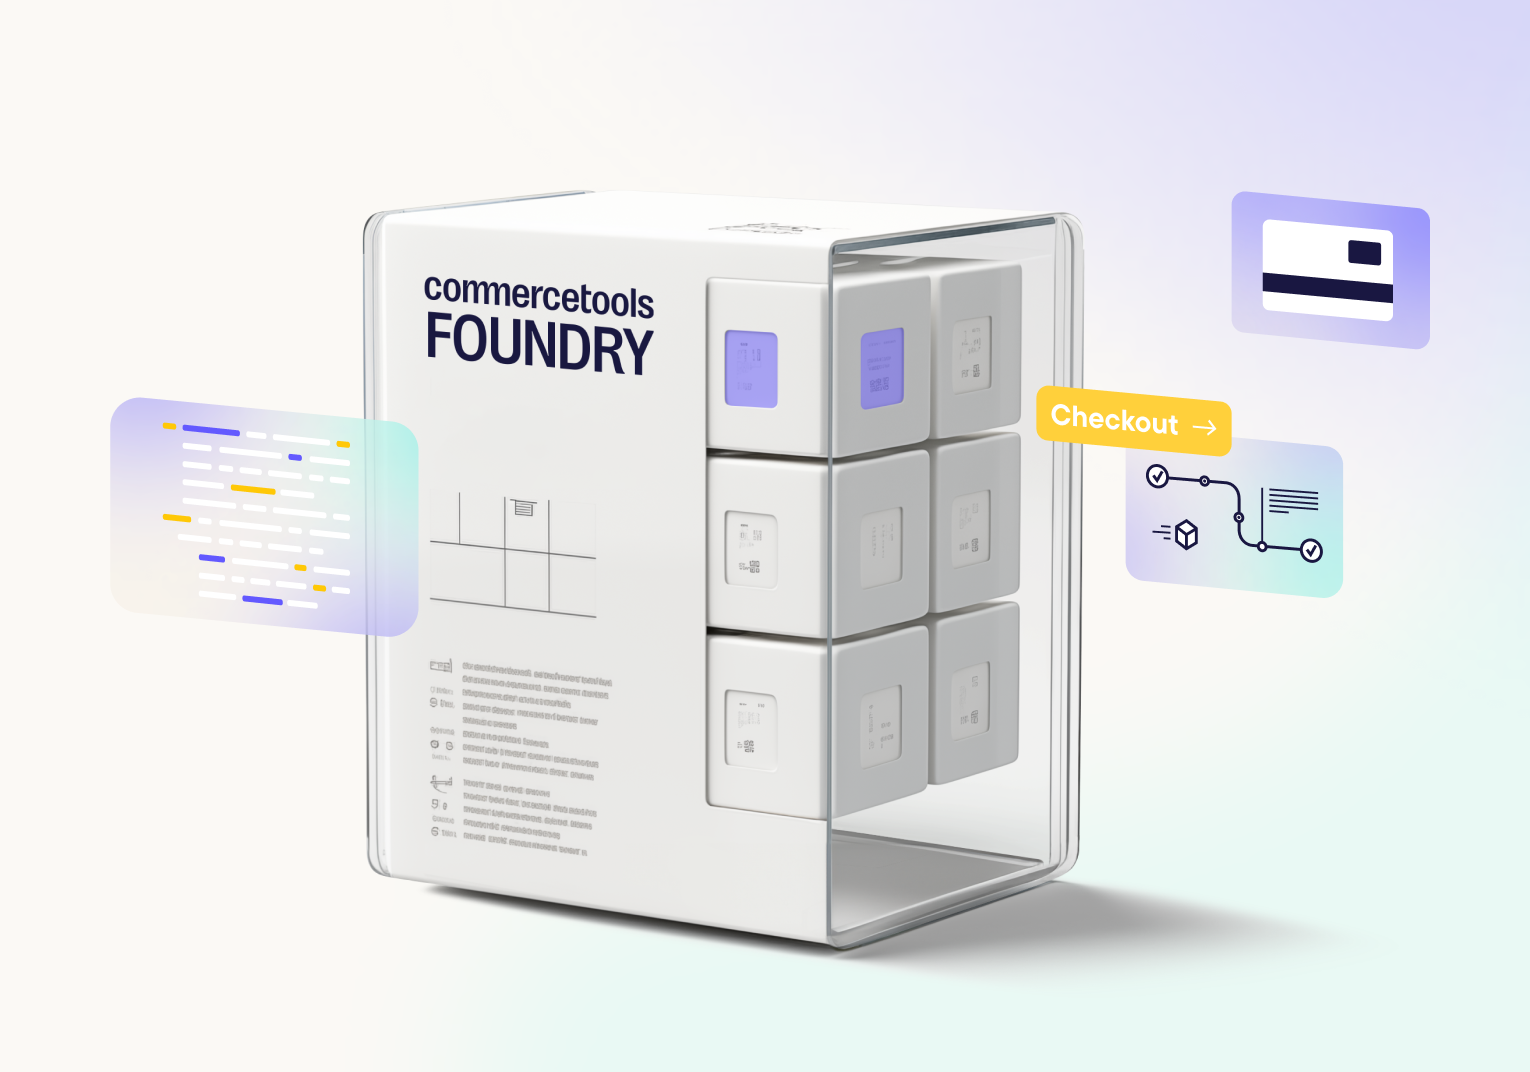 Simplify Everything, Compromise Nothing with commercetools Foundry